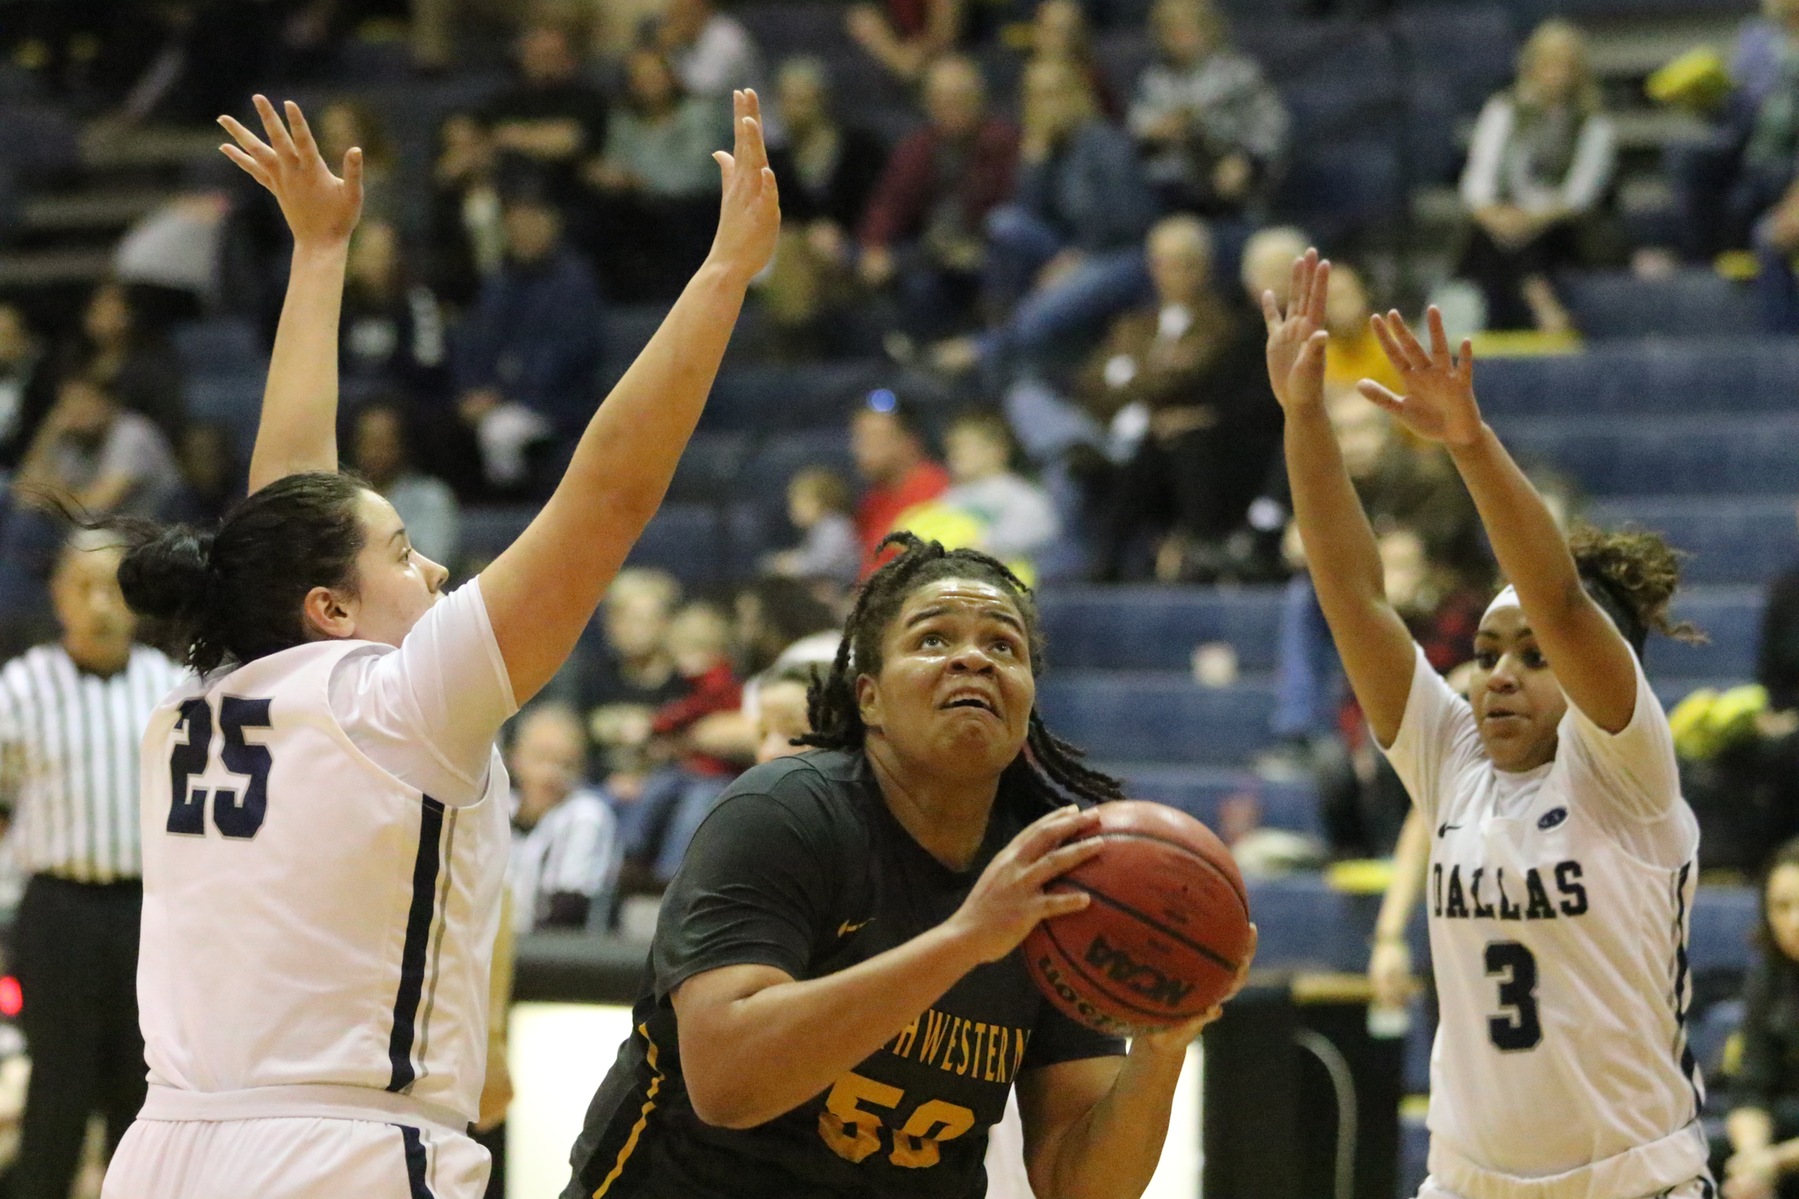 Women's Basketball Dominates Defensively in Win Over Dallas